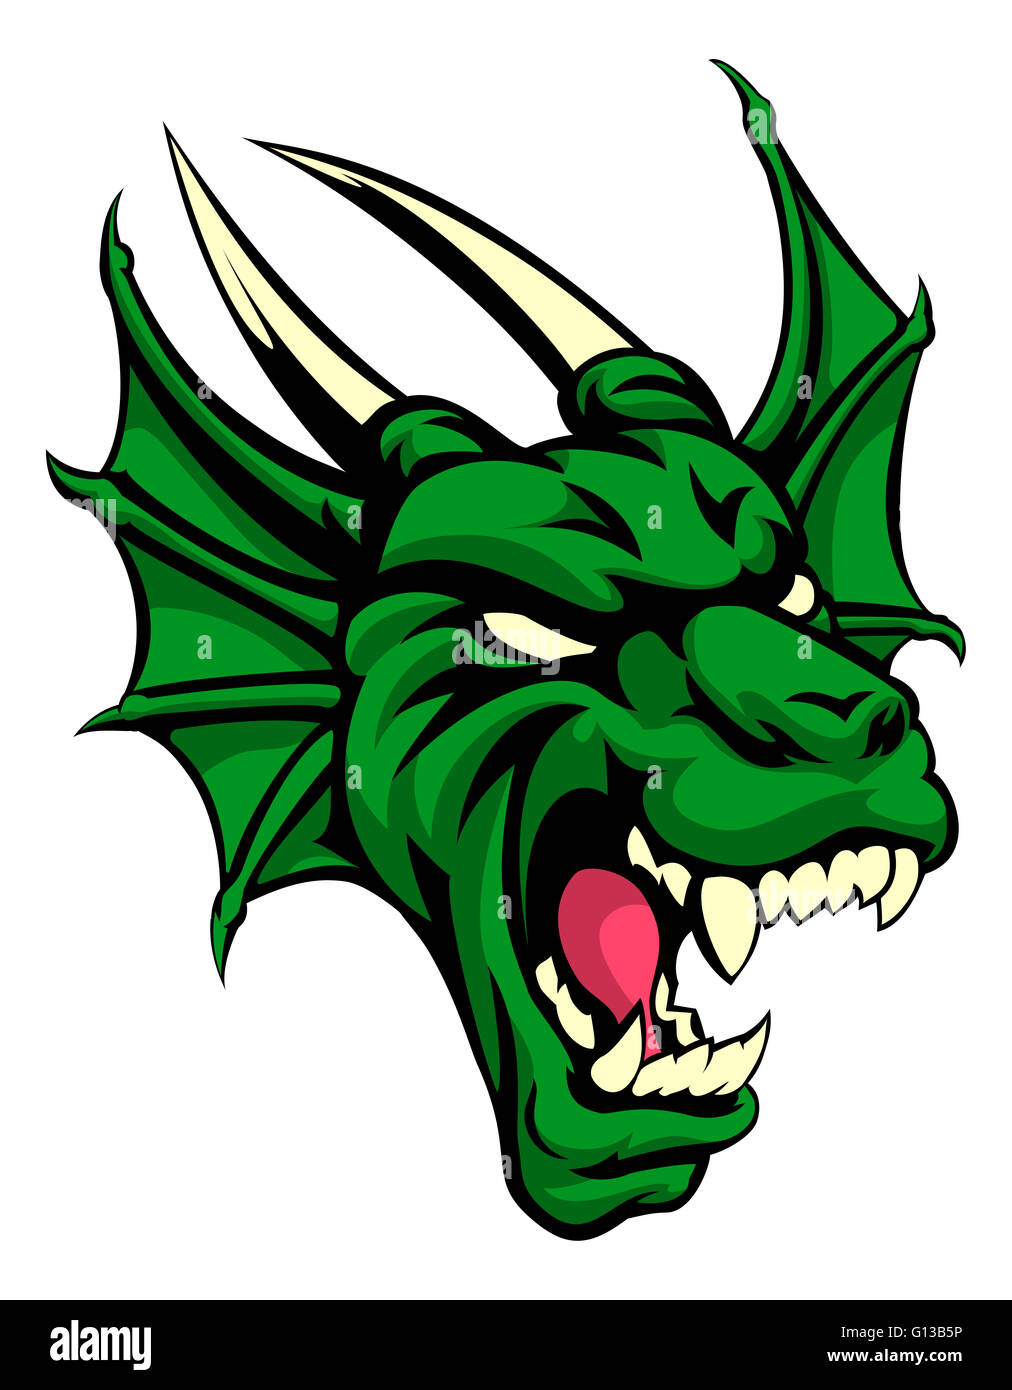 An illustration of a dragon animal mean sports mascot head Stock Photo